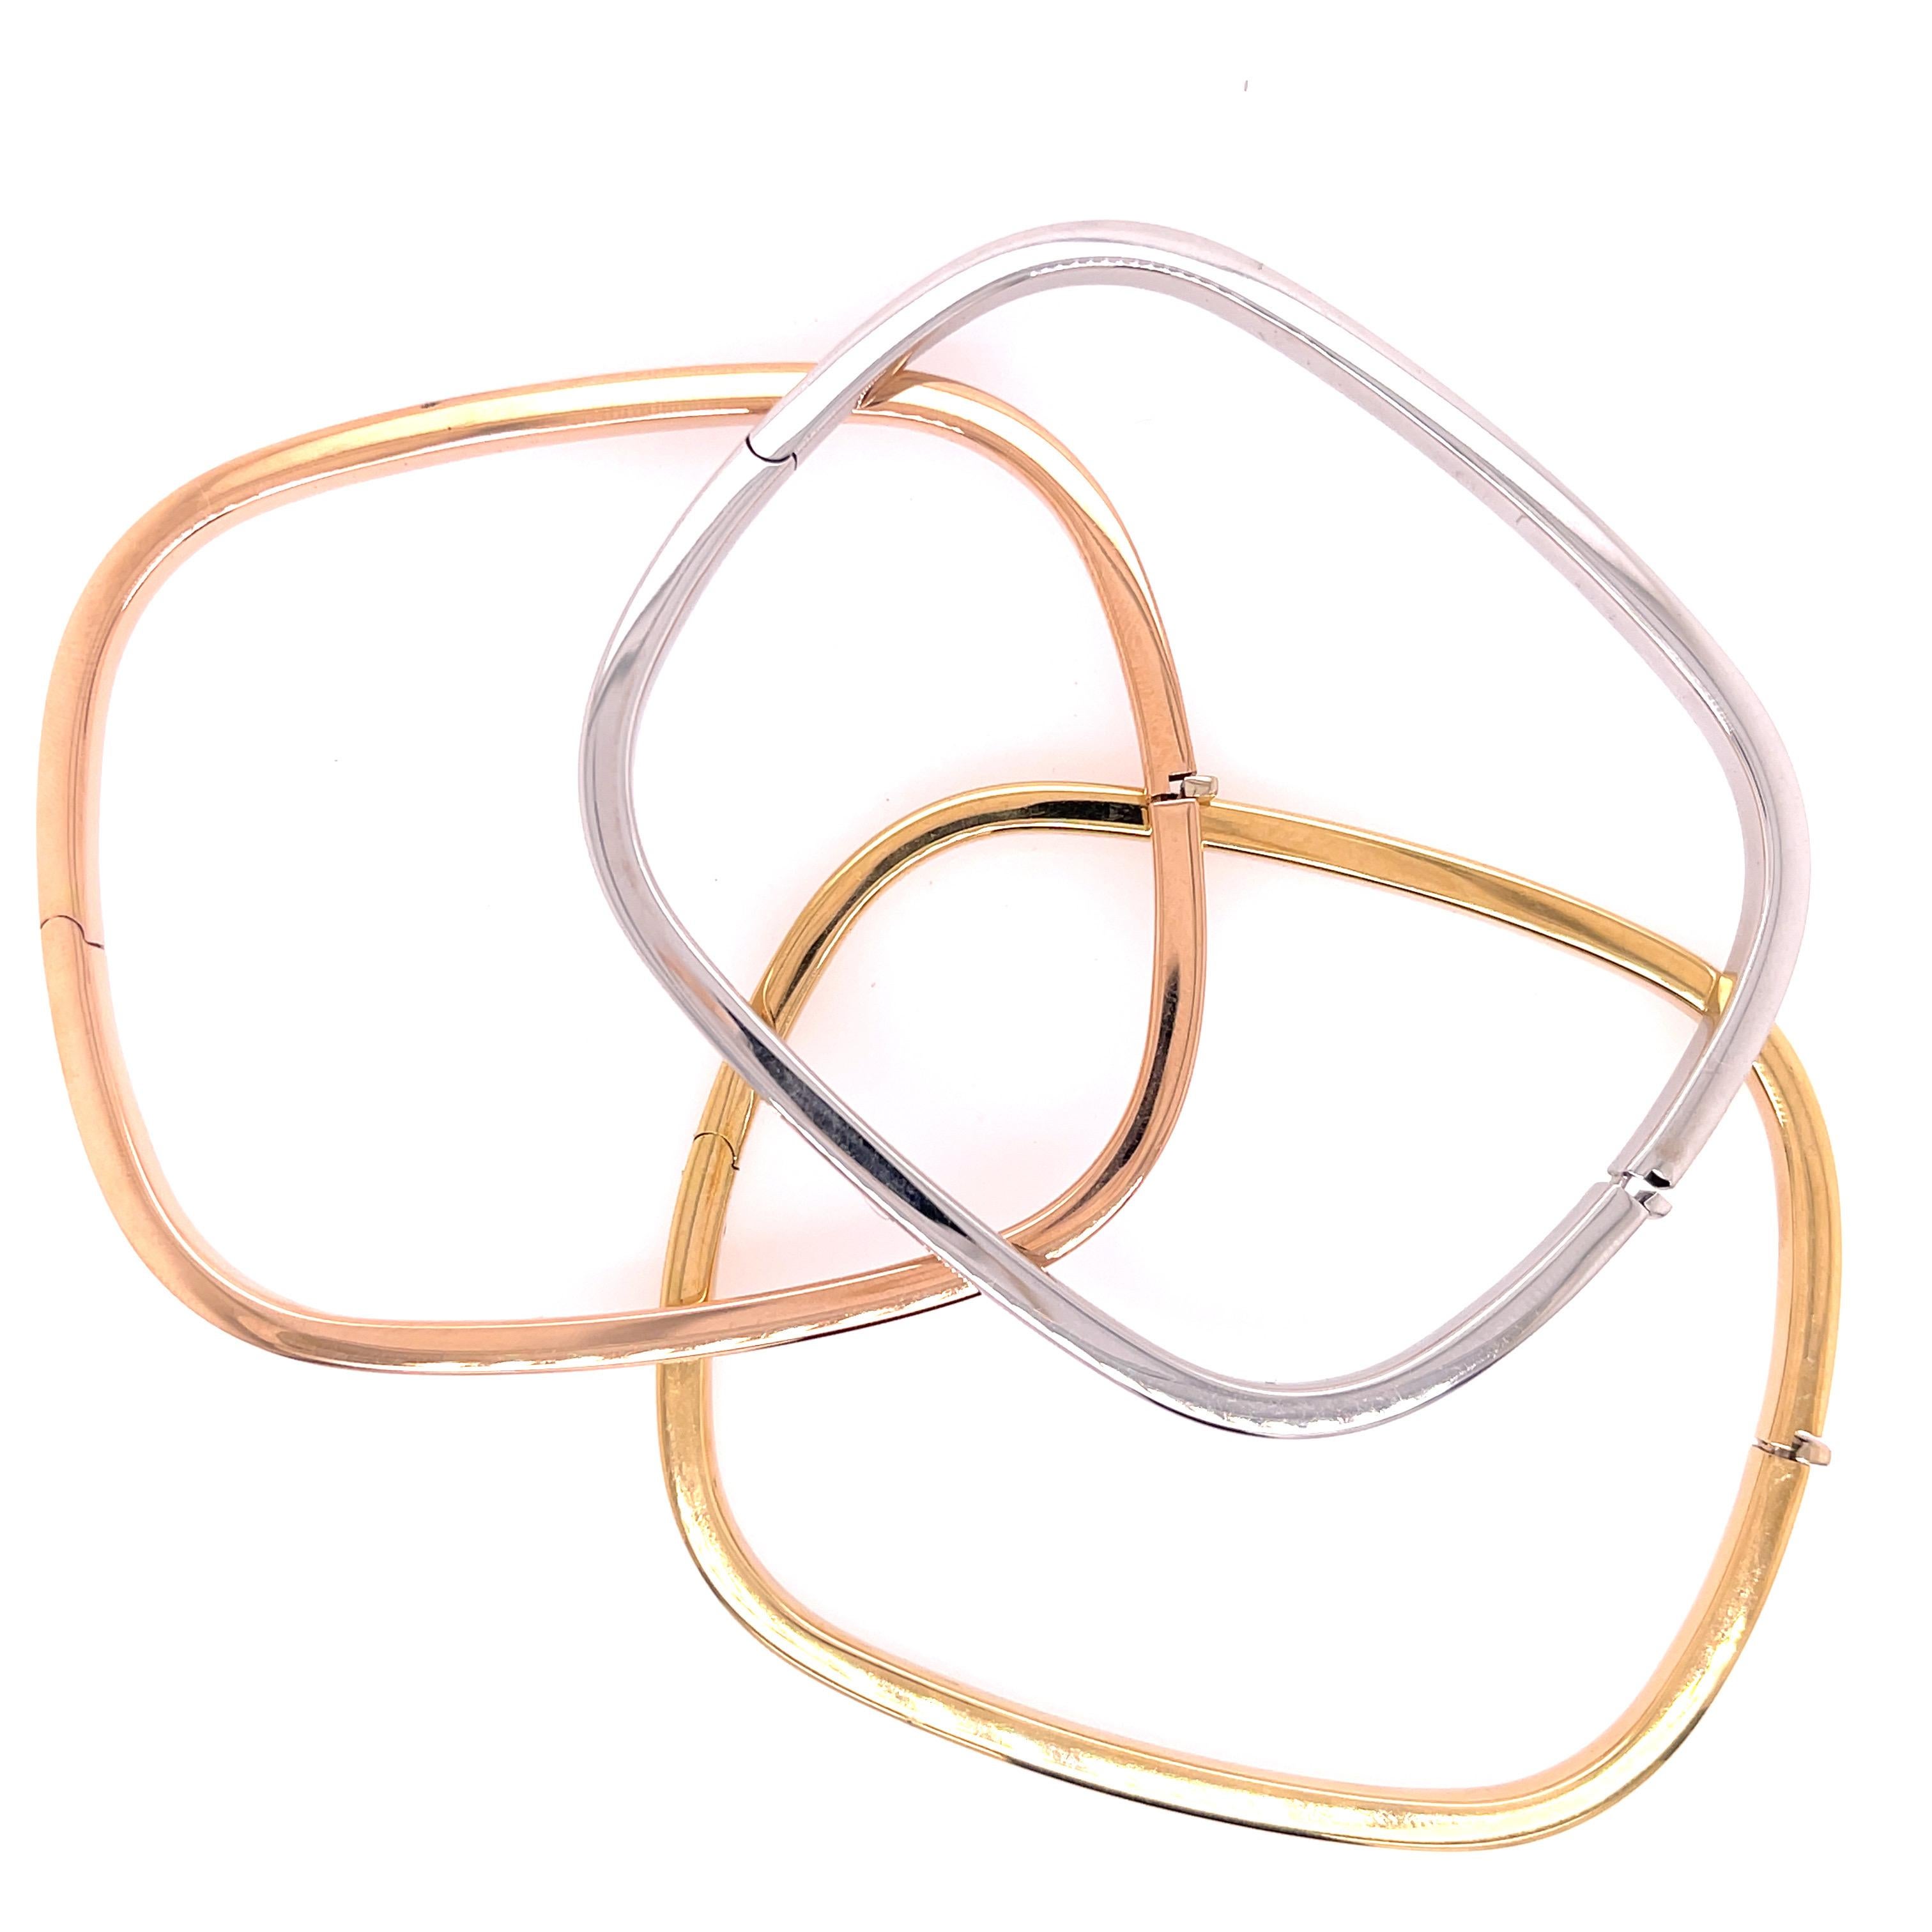 Set of 3 Square Bangles in 18K White, Rose, and Yellow Gold. Inner circumference of each bangle is 7 inches.